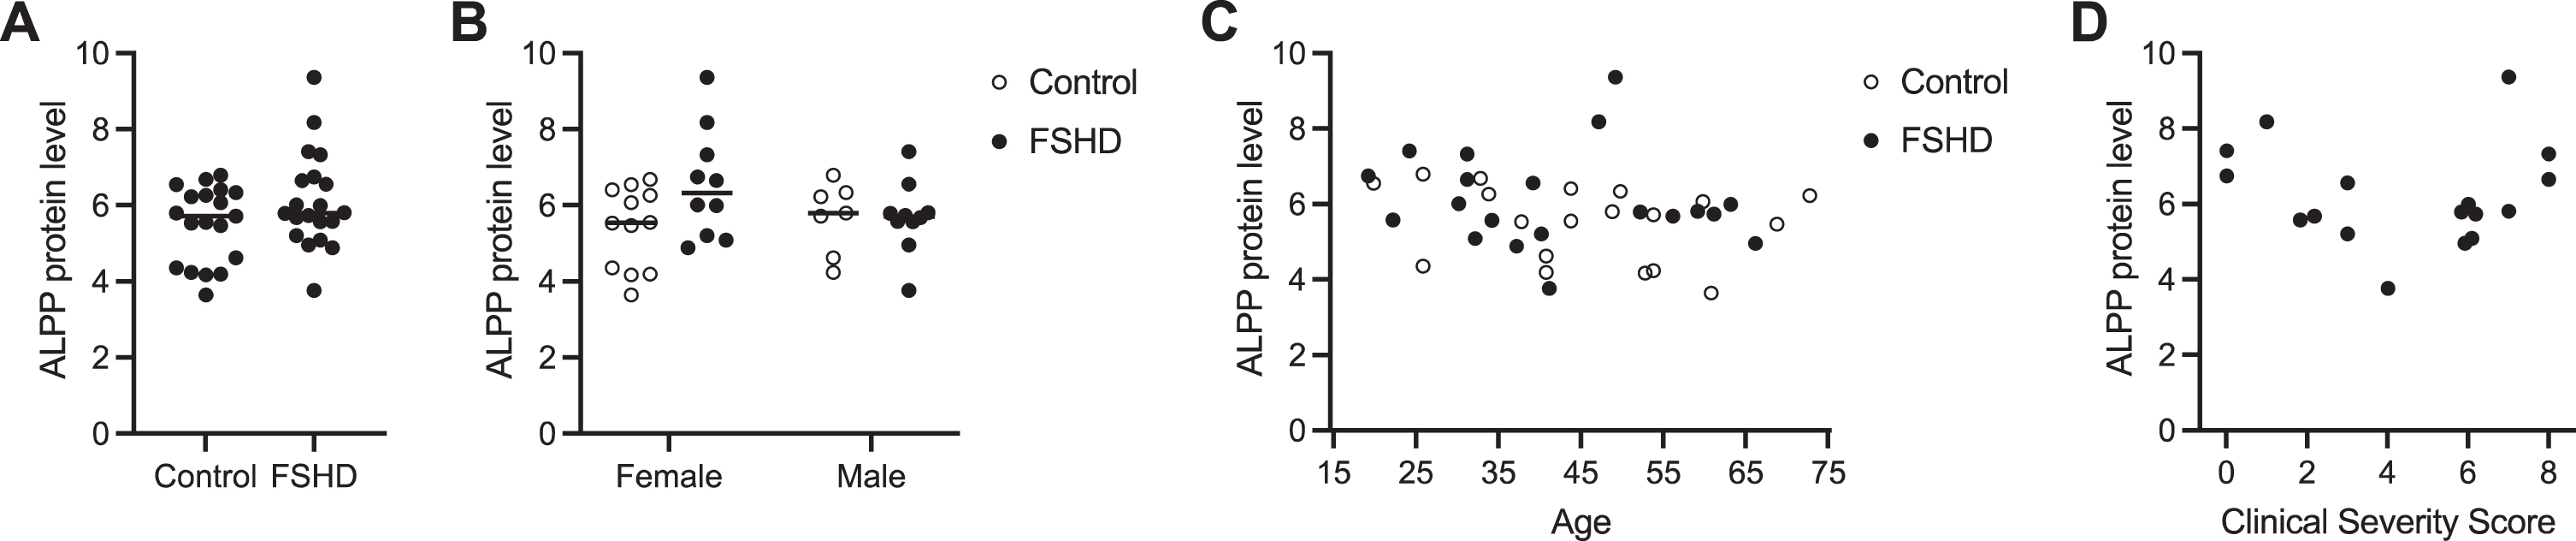 Serum ALPP levels do not predict FSHD disease state. (A) ALPP protein levels presented as normalized log2 expression values measured by Olink Proteomics assay in serum from 20 individuals with FSHD and 20 unaffected controls. (B–D) ALPP protein levels shown in (A) stratified by sex (B), age (C), and FSHD Clinical Severity Score (D).